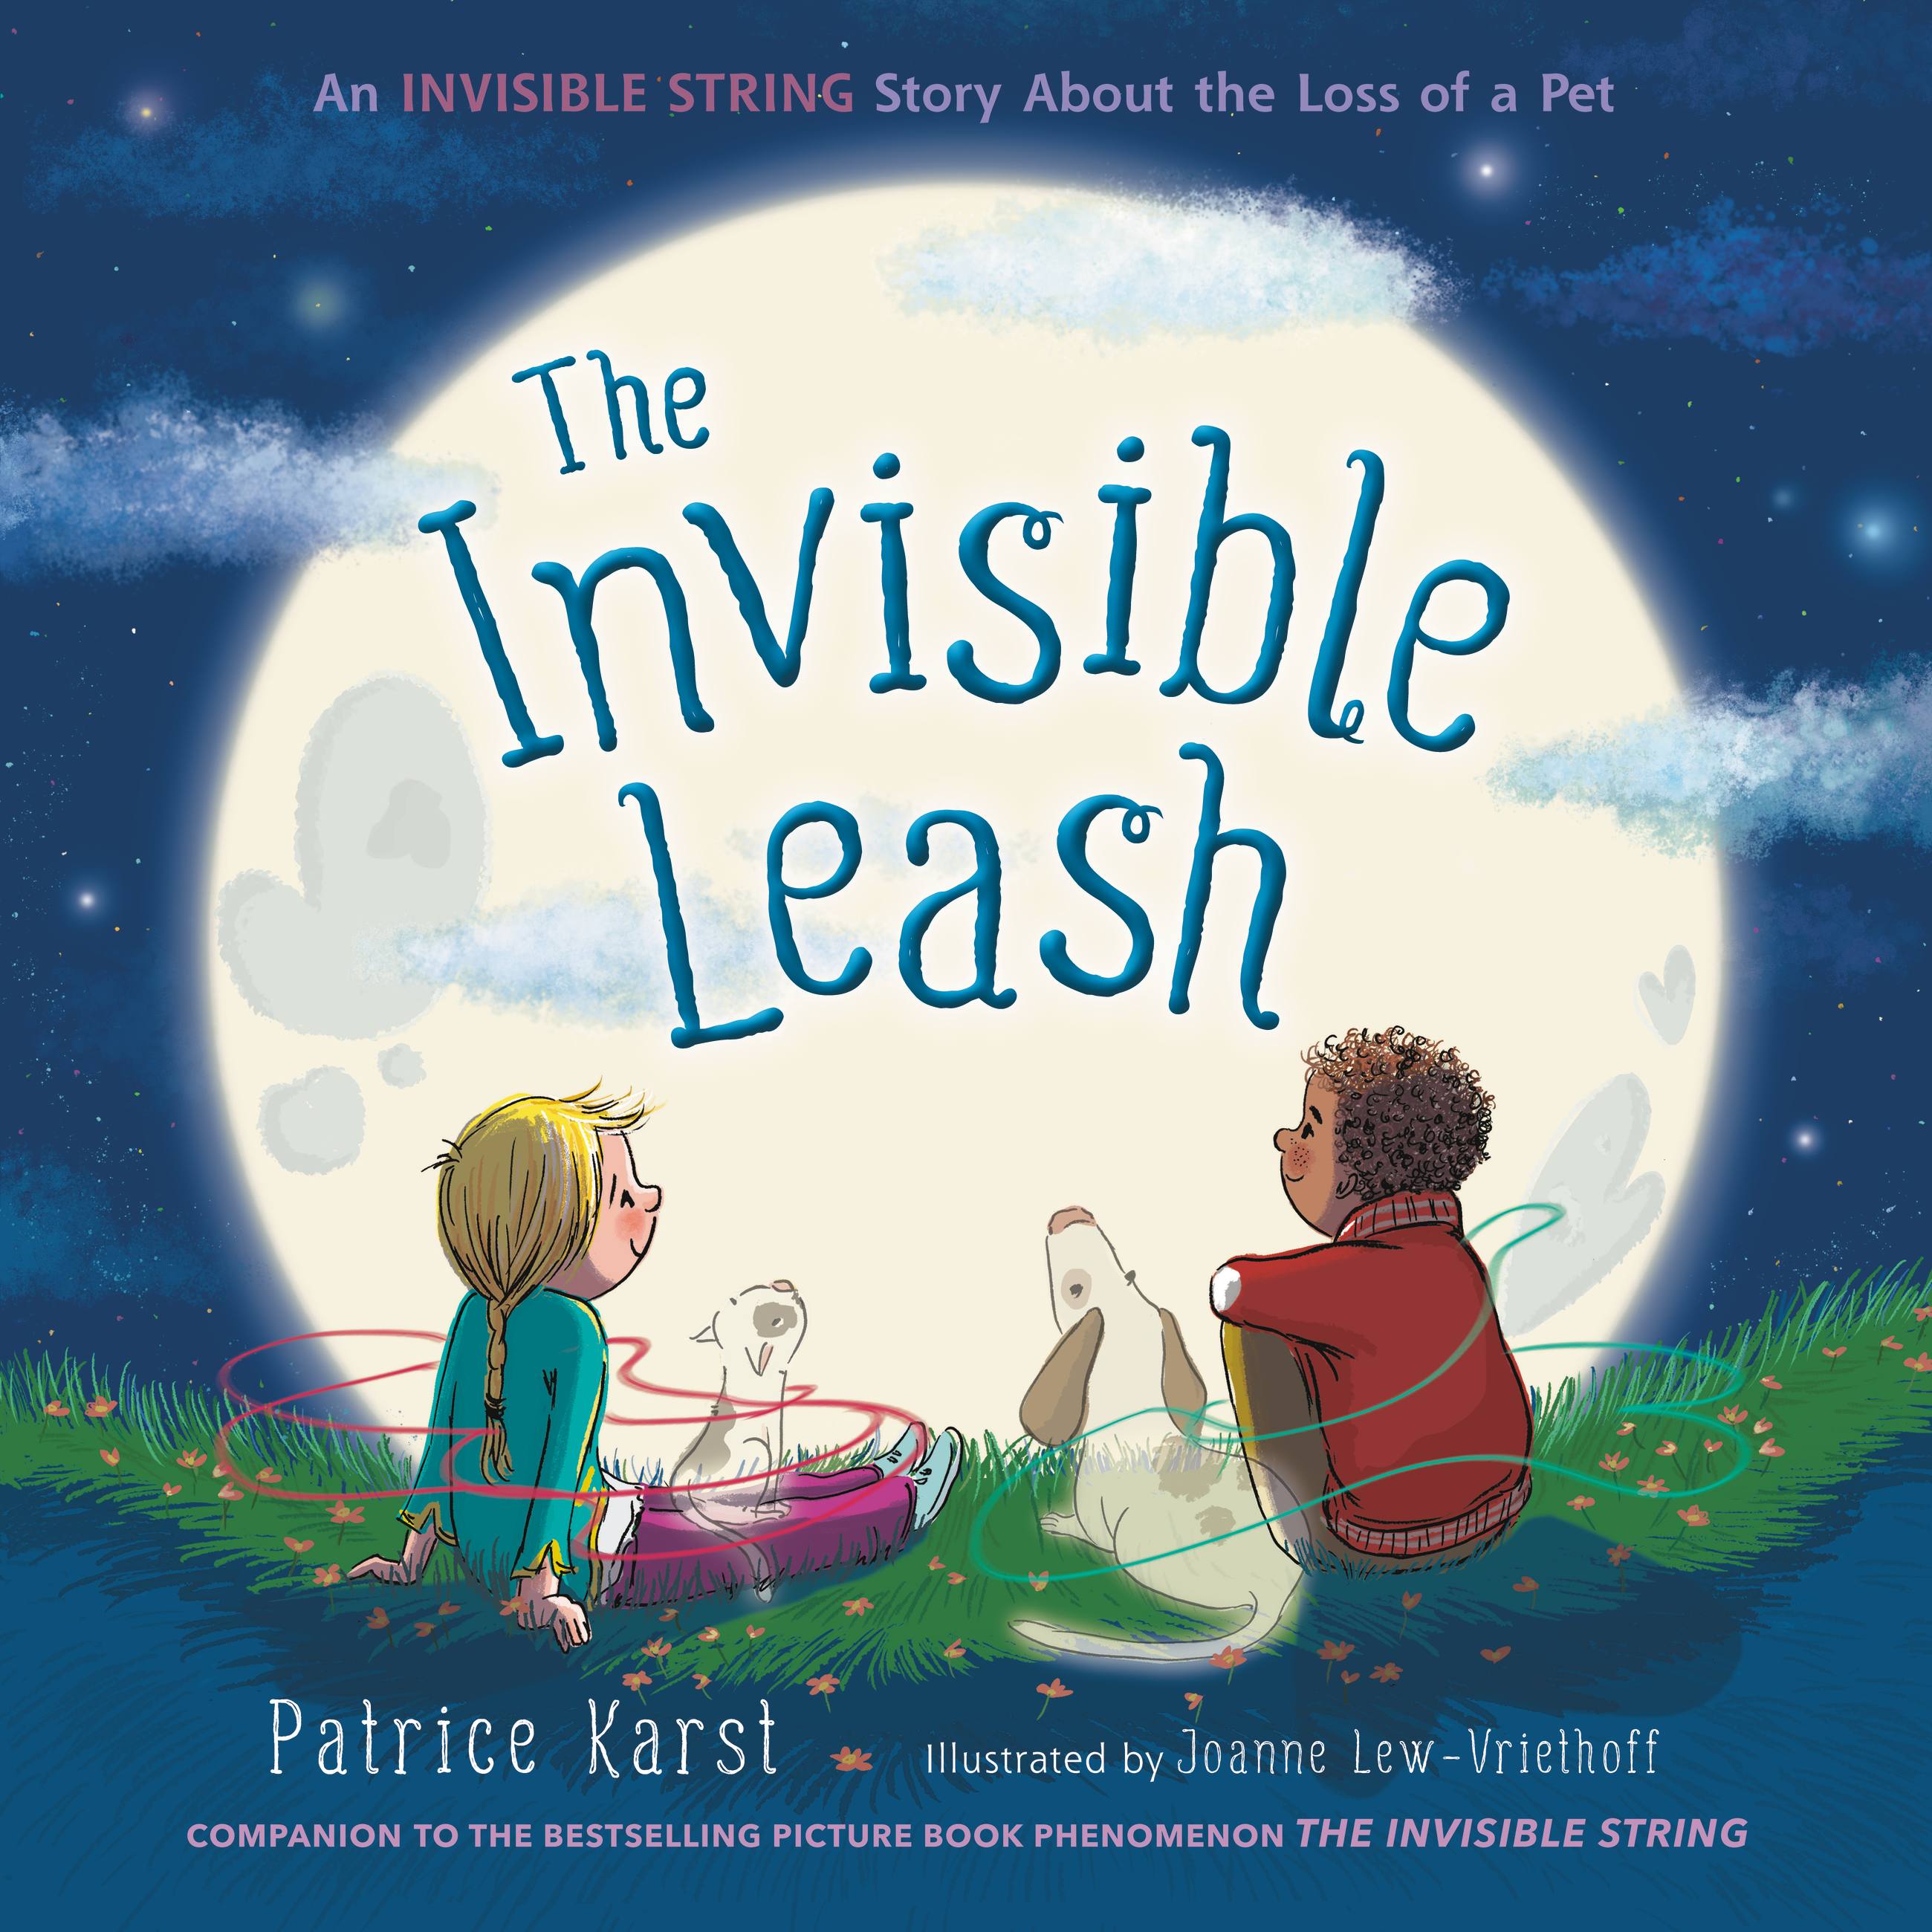 The Invisible Leash by Patrice Karst